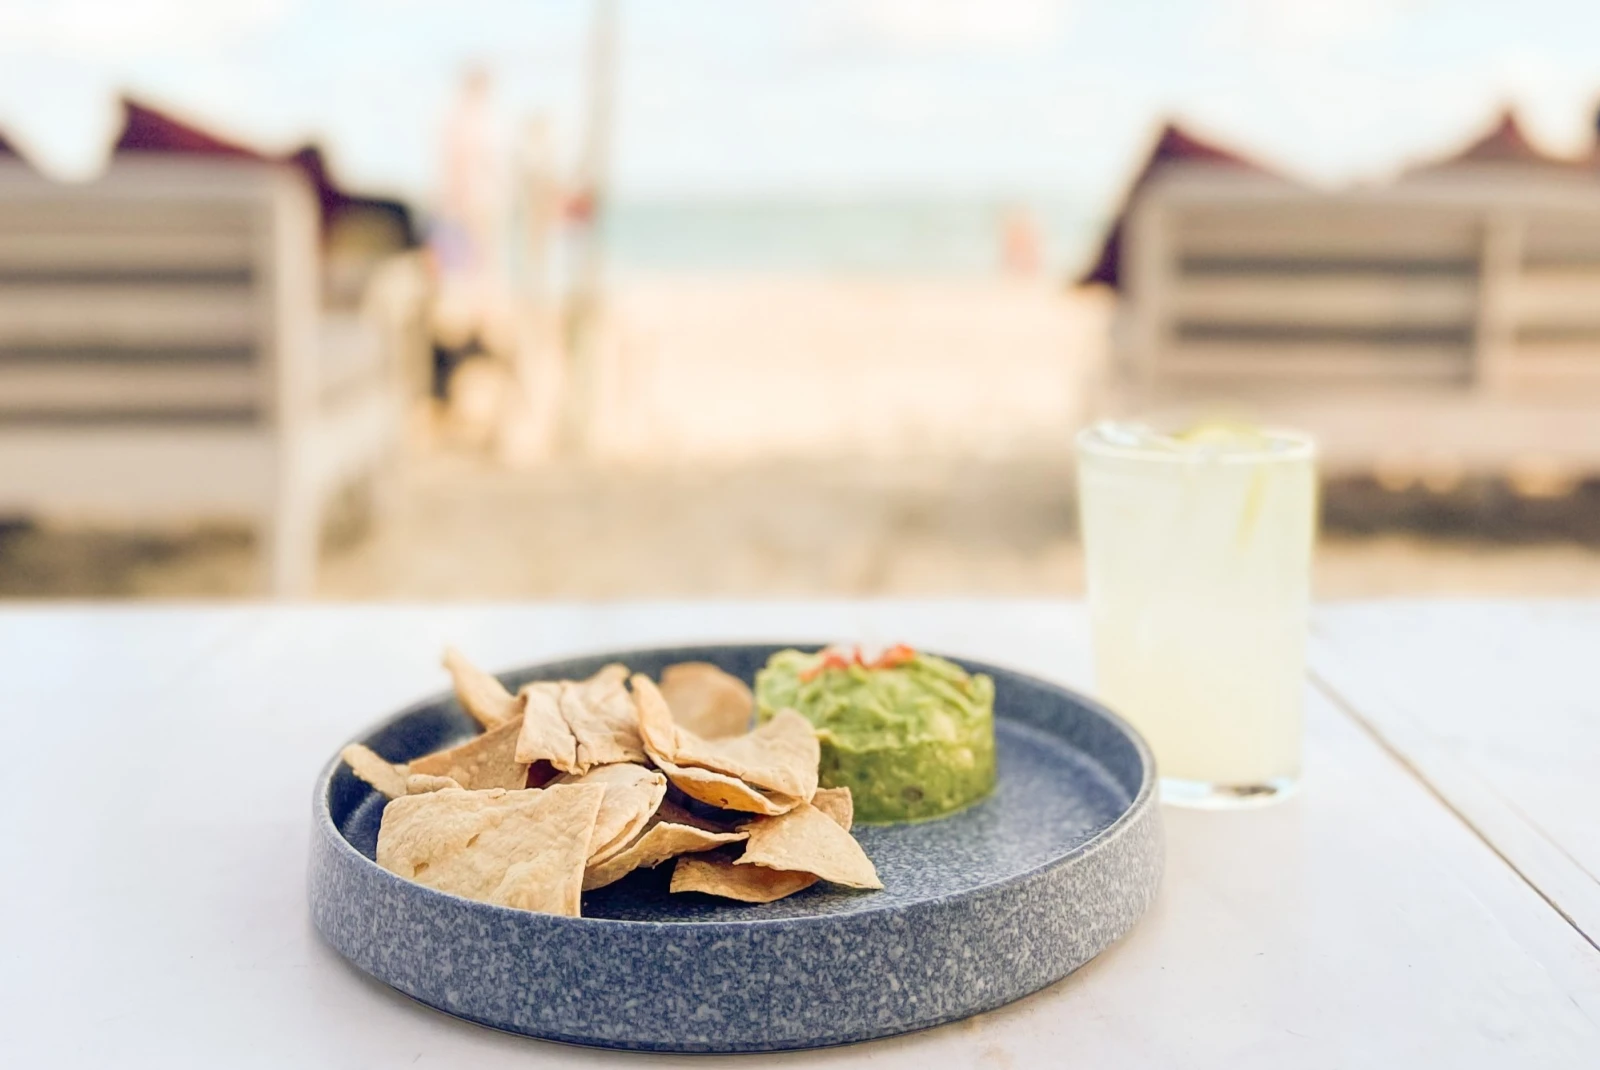 Discover the Magic of Playa del Carmen - Places to eat & drink